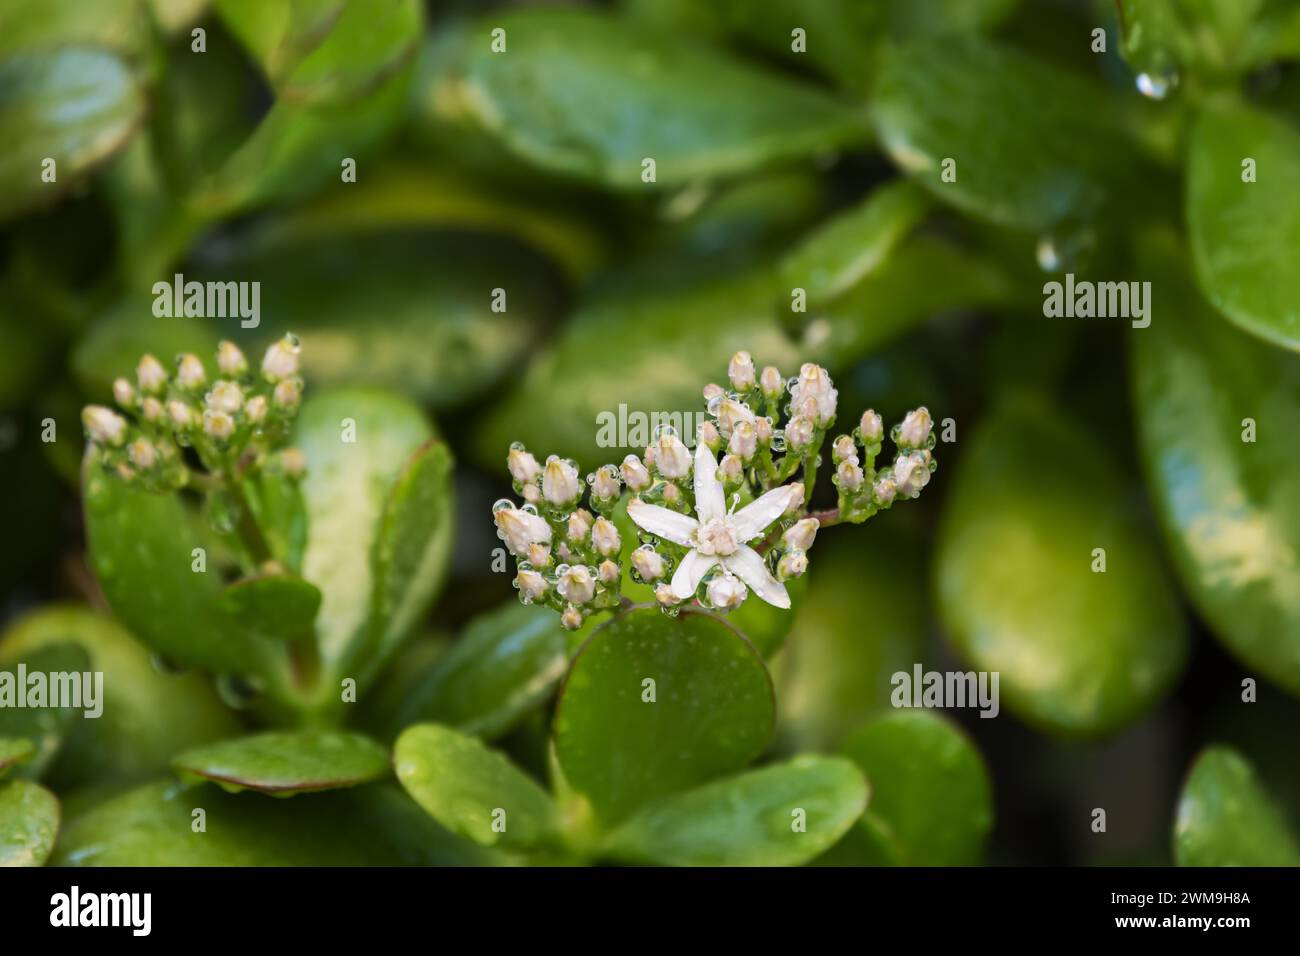 Flowers of a jade plant filled with rainwater drops Stock Photo